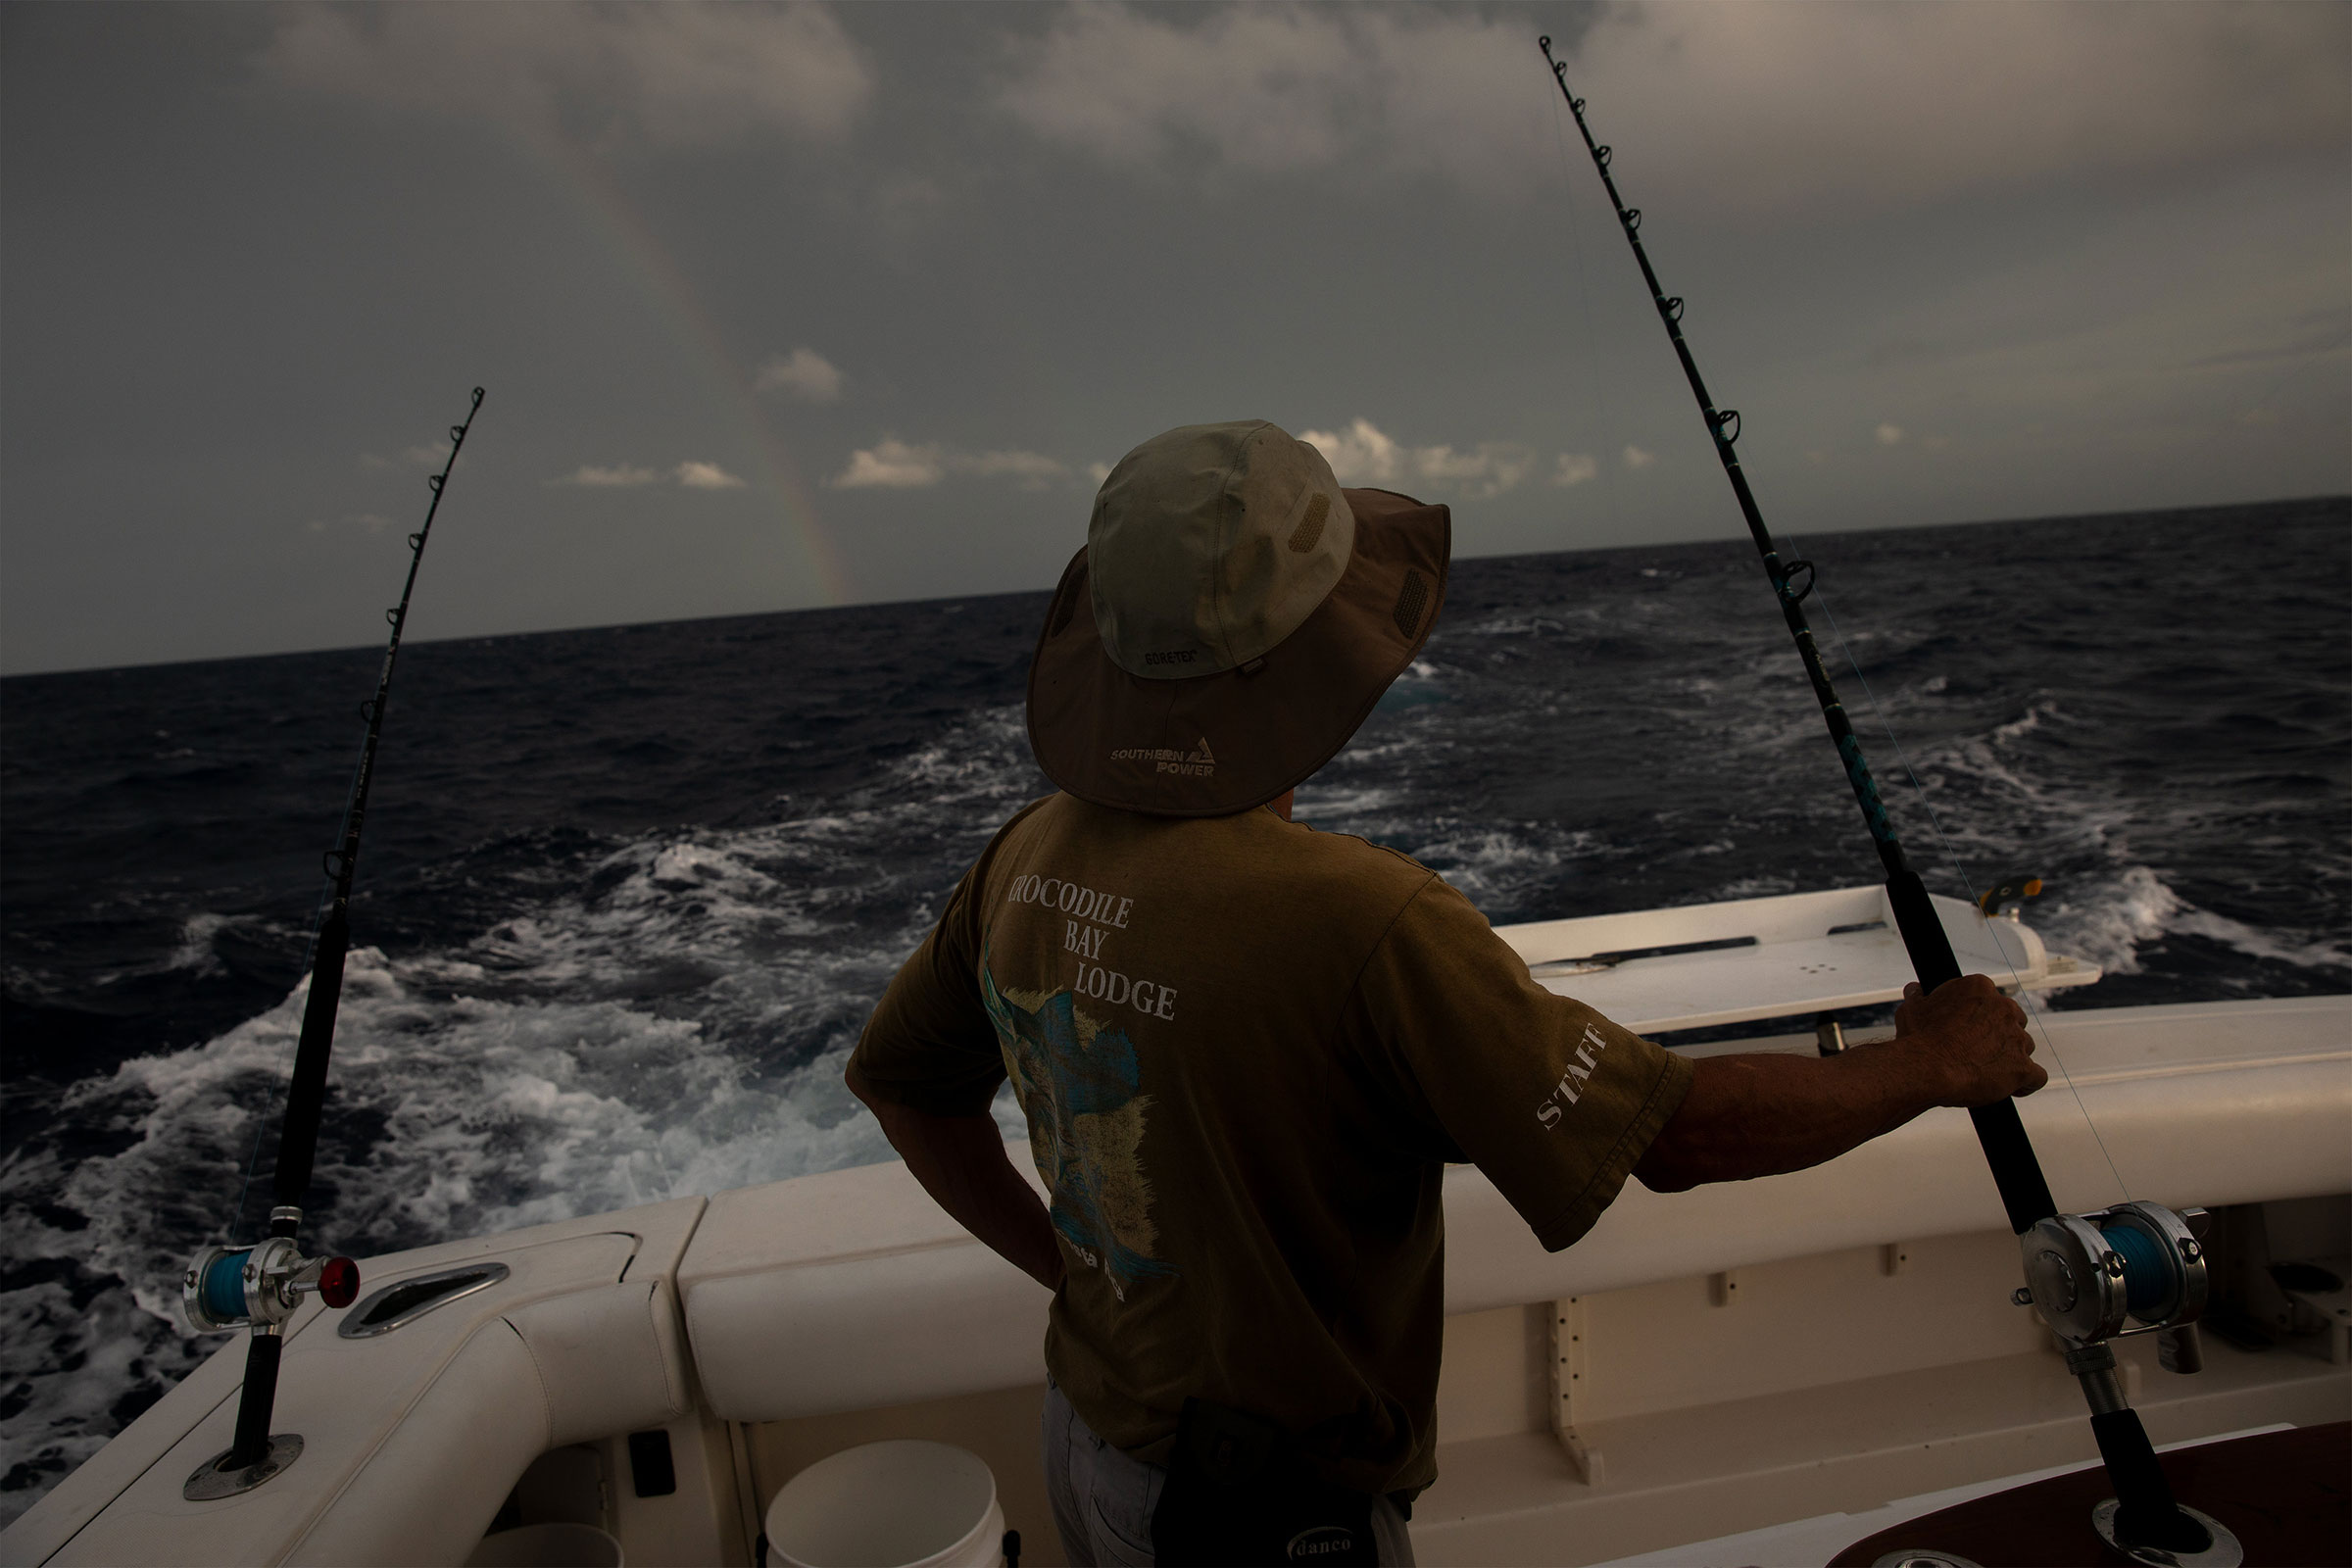 Offshore fishing off the coast of South Florida and The Bahamas. Documenting fishermen after tuna, dolphin, mahi and storms across the Atlantic.